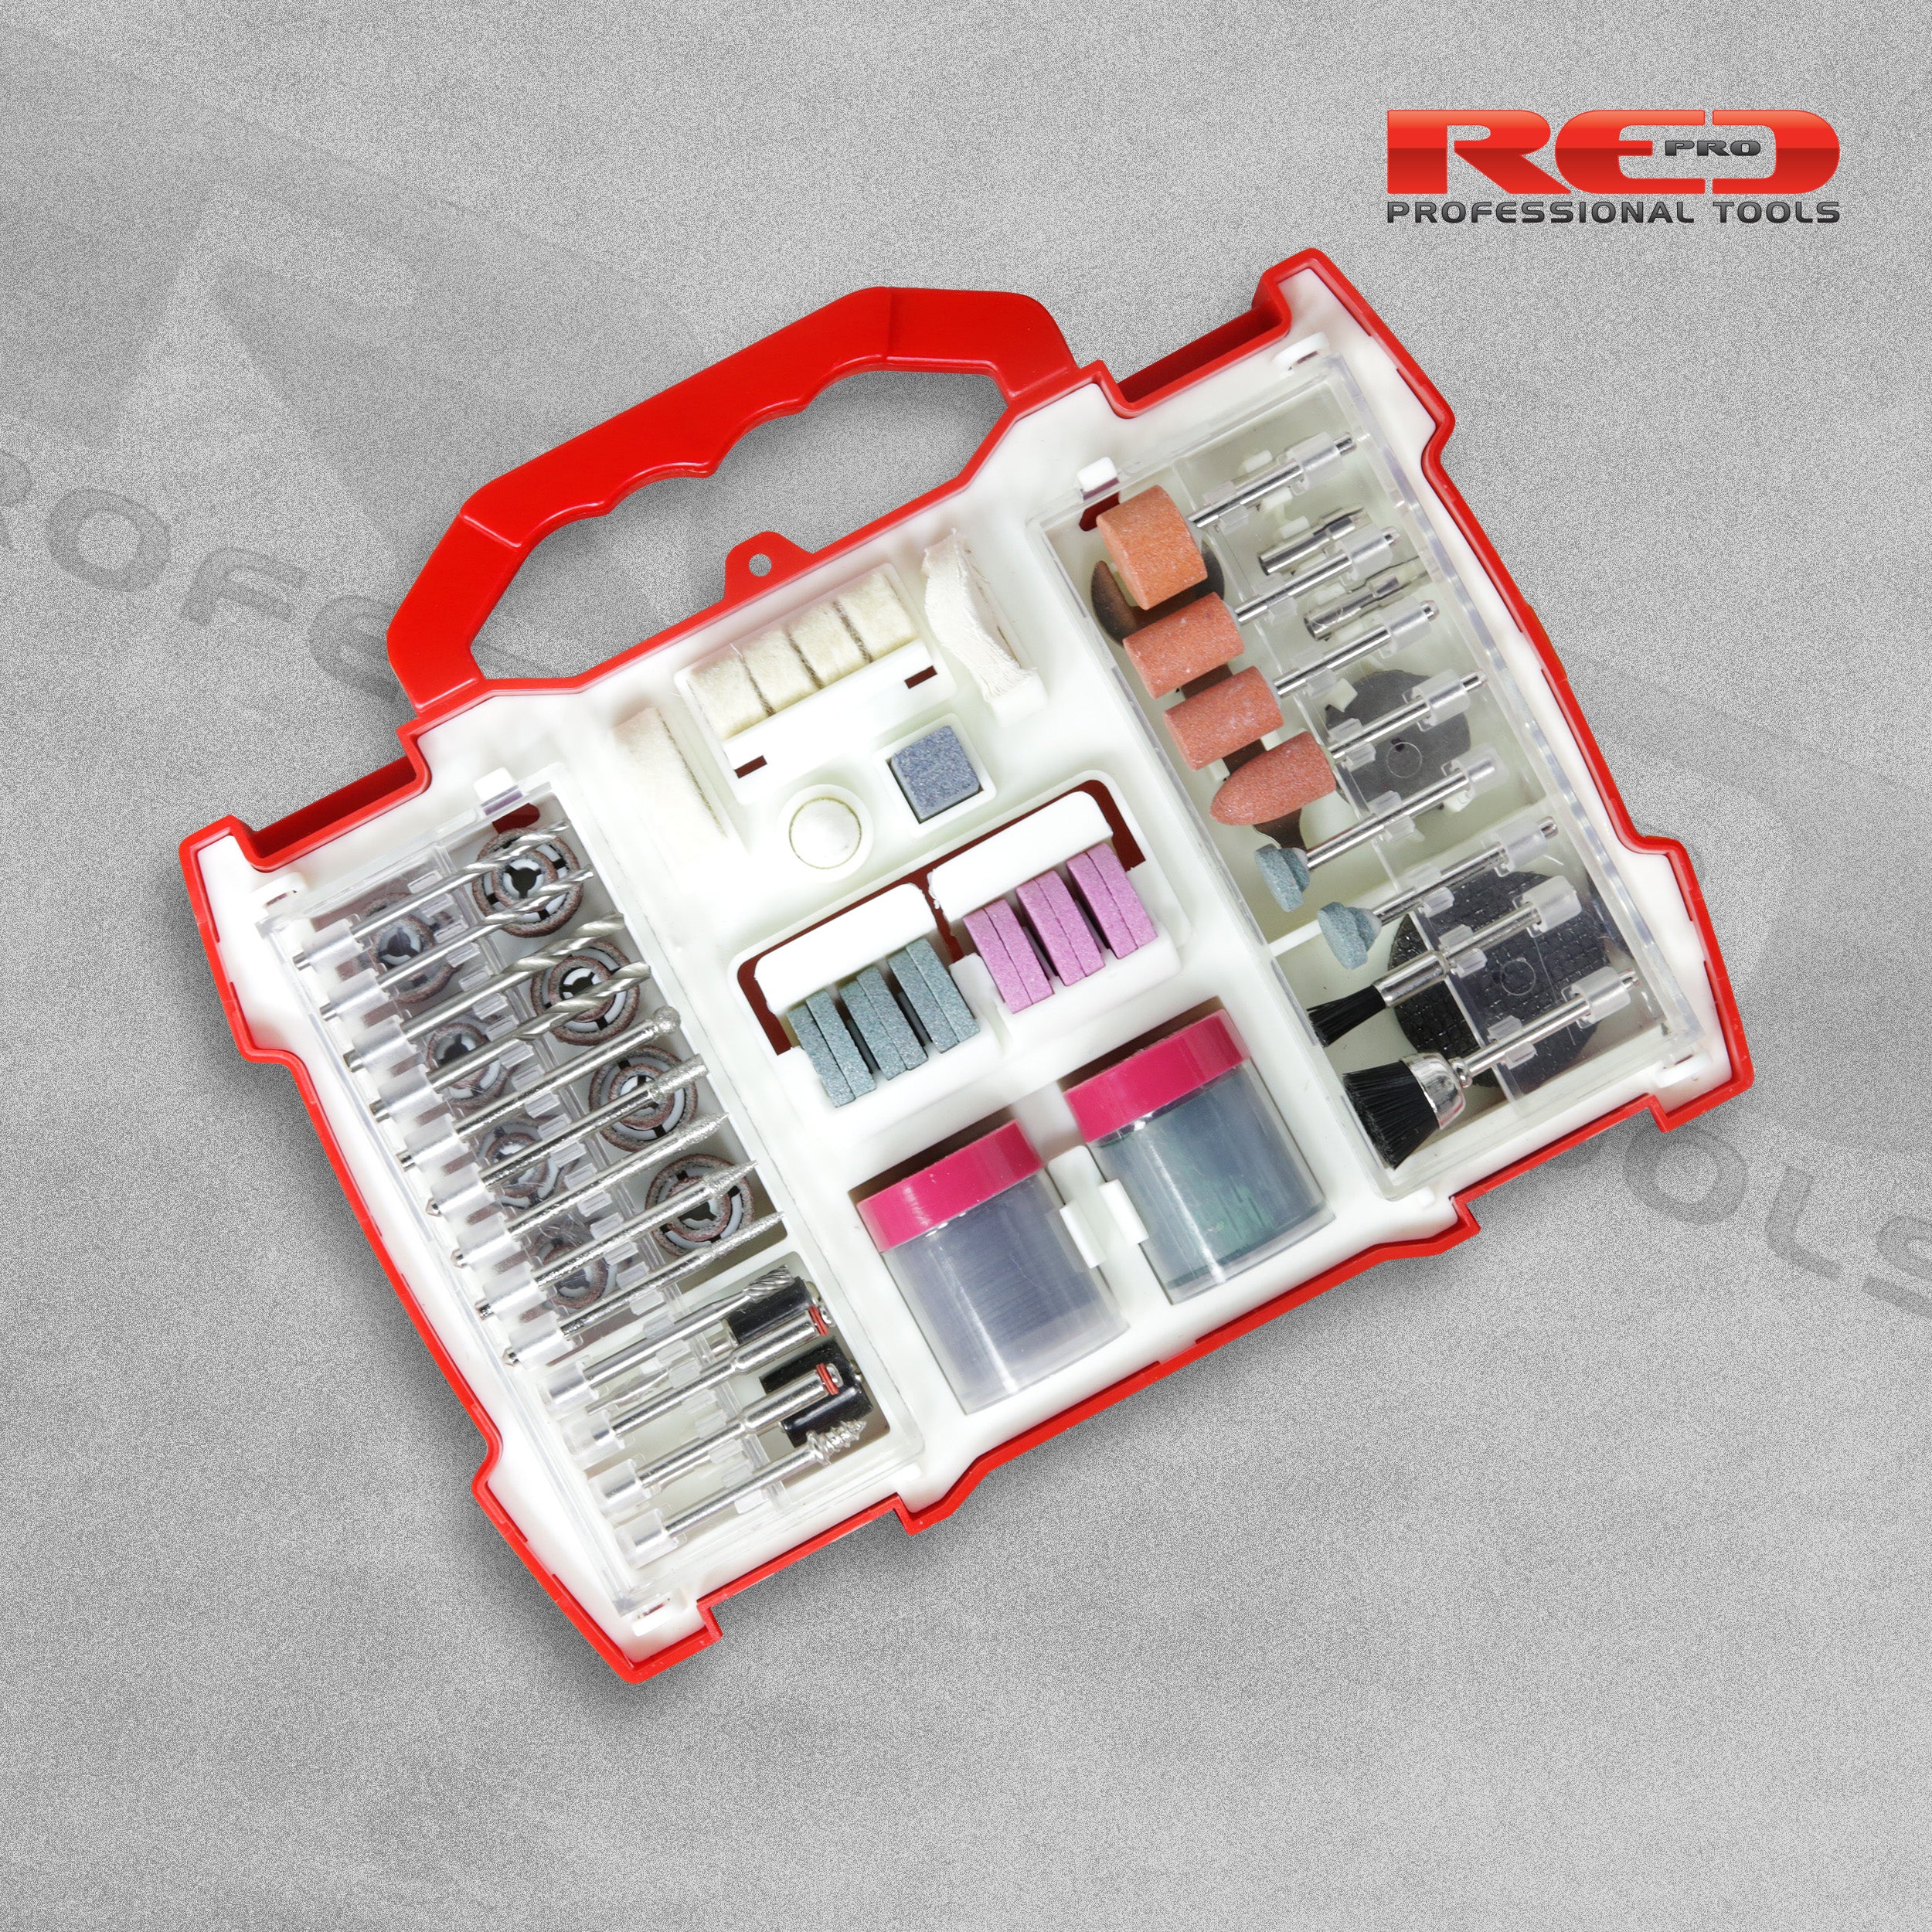 Red Pro Tools 99pc Rotary Tool Accessories Set